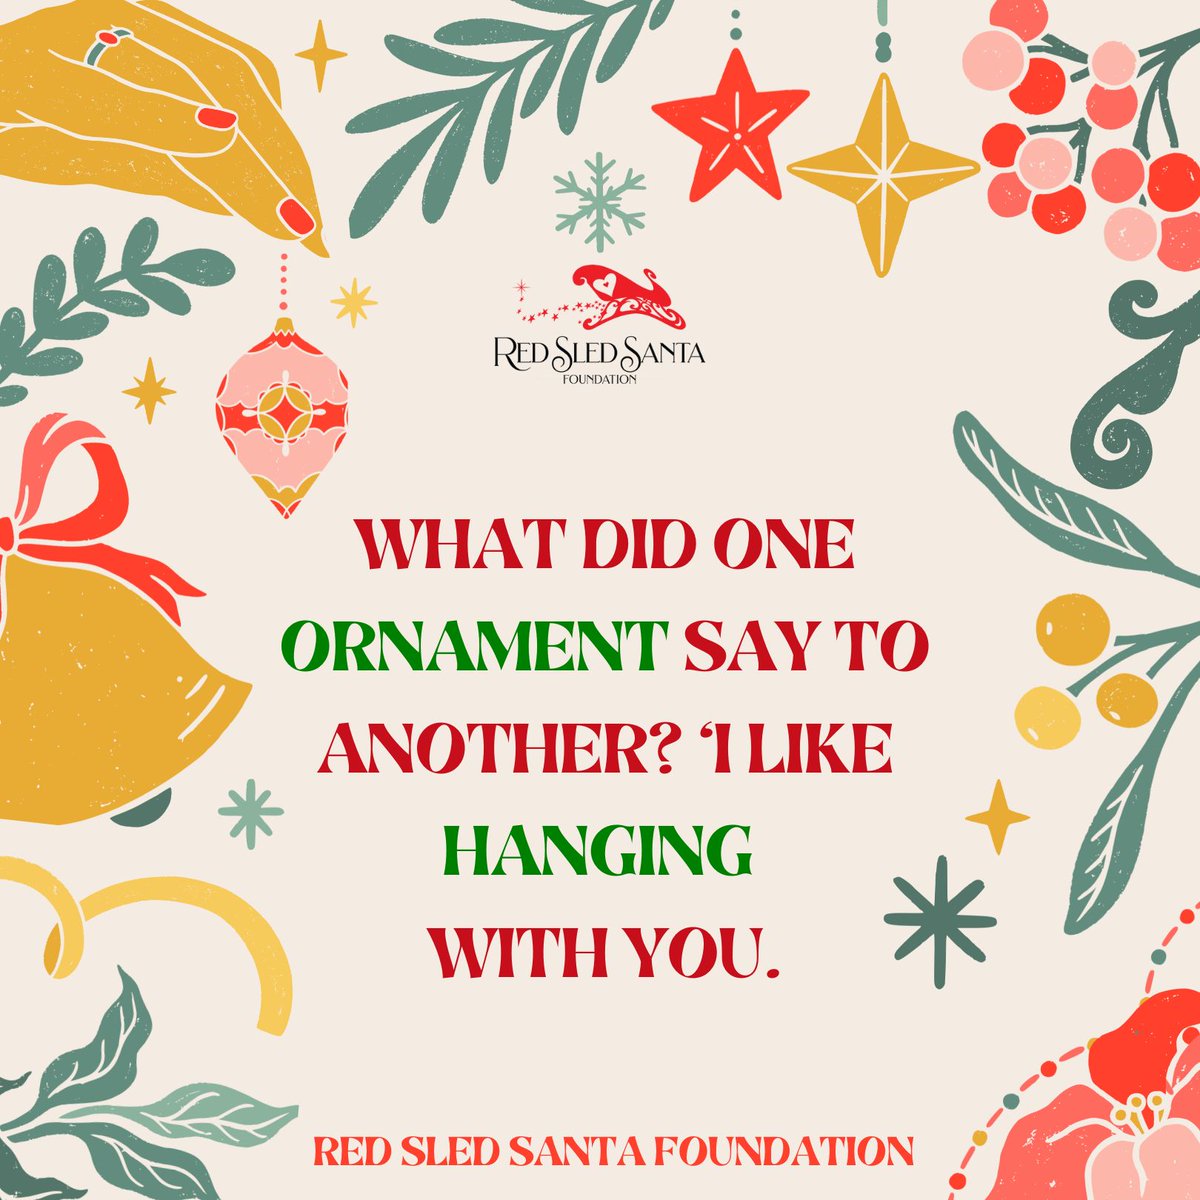 Christmas will always be as long as we stand heart to heart and hand in hand.
-
redsledfoundation.org
-
#redsledsantafoundation #RSSF #redsledsanta #santacortney #cortneylofton #xmastree #xmas #christmas #christmastree #xmasdecor #xmastime #christmasdecor #christmastime #santa